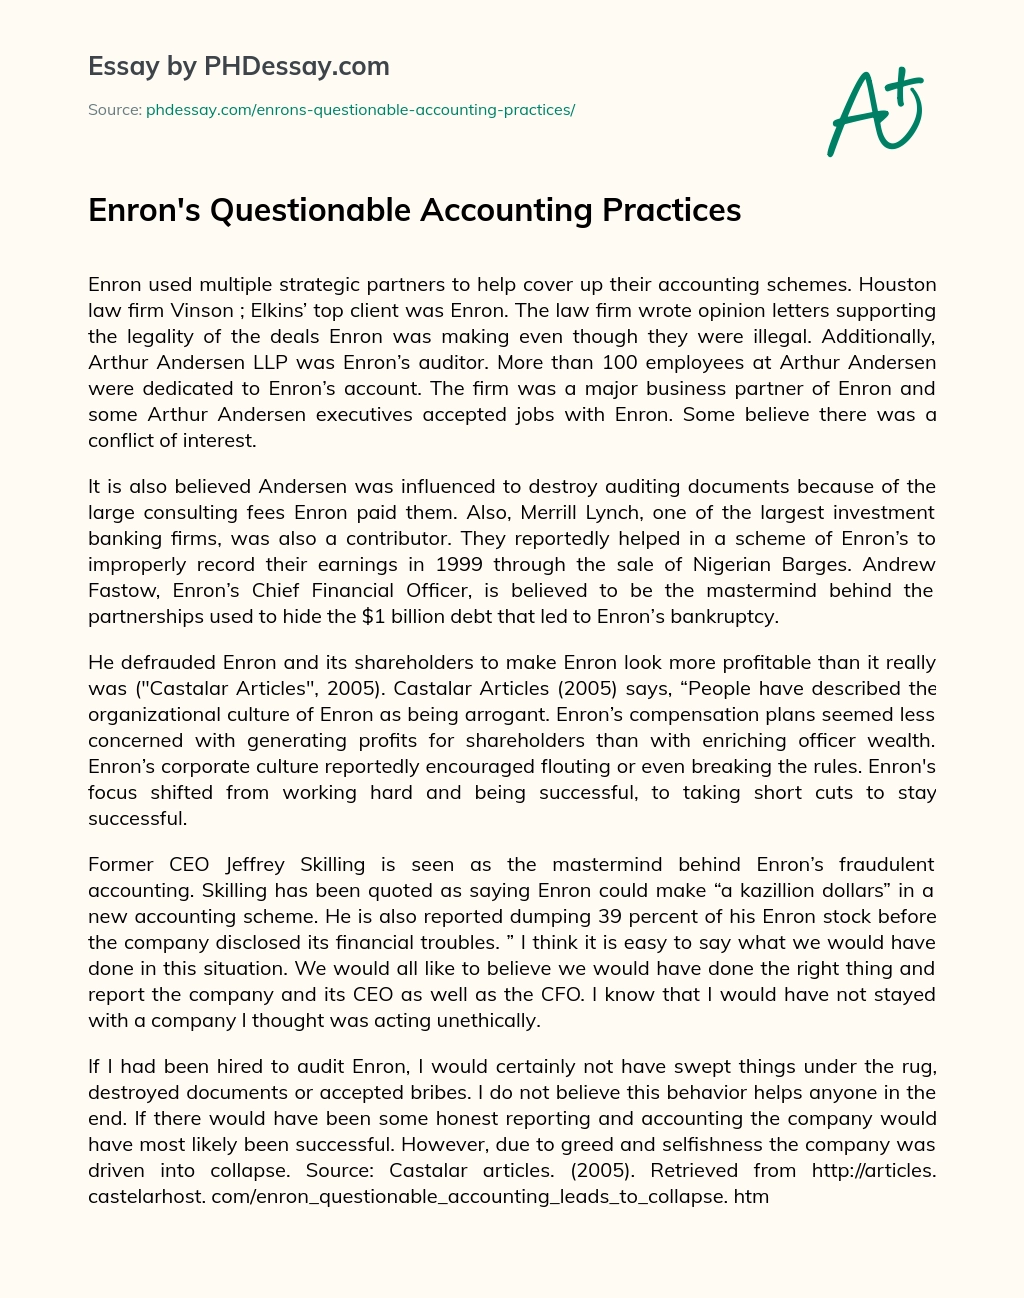 Enron’s Questionable Accounting Practices essay